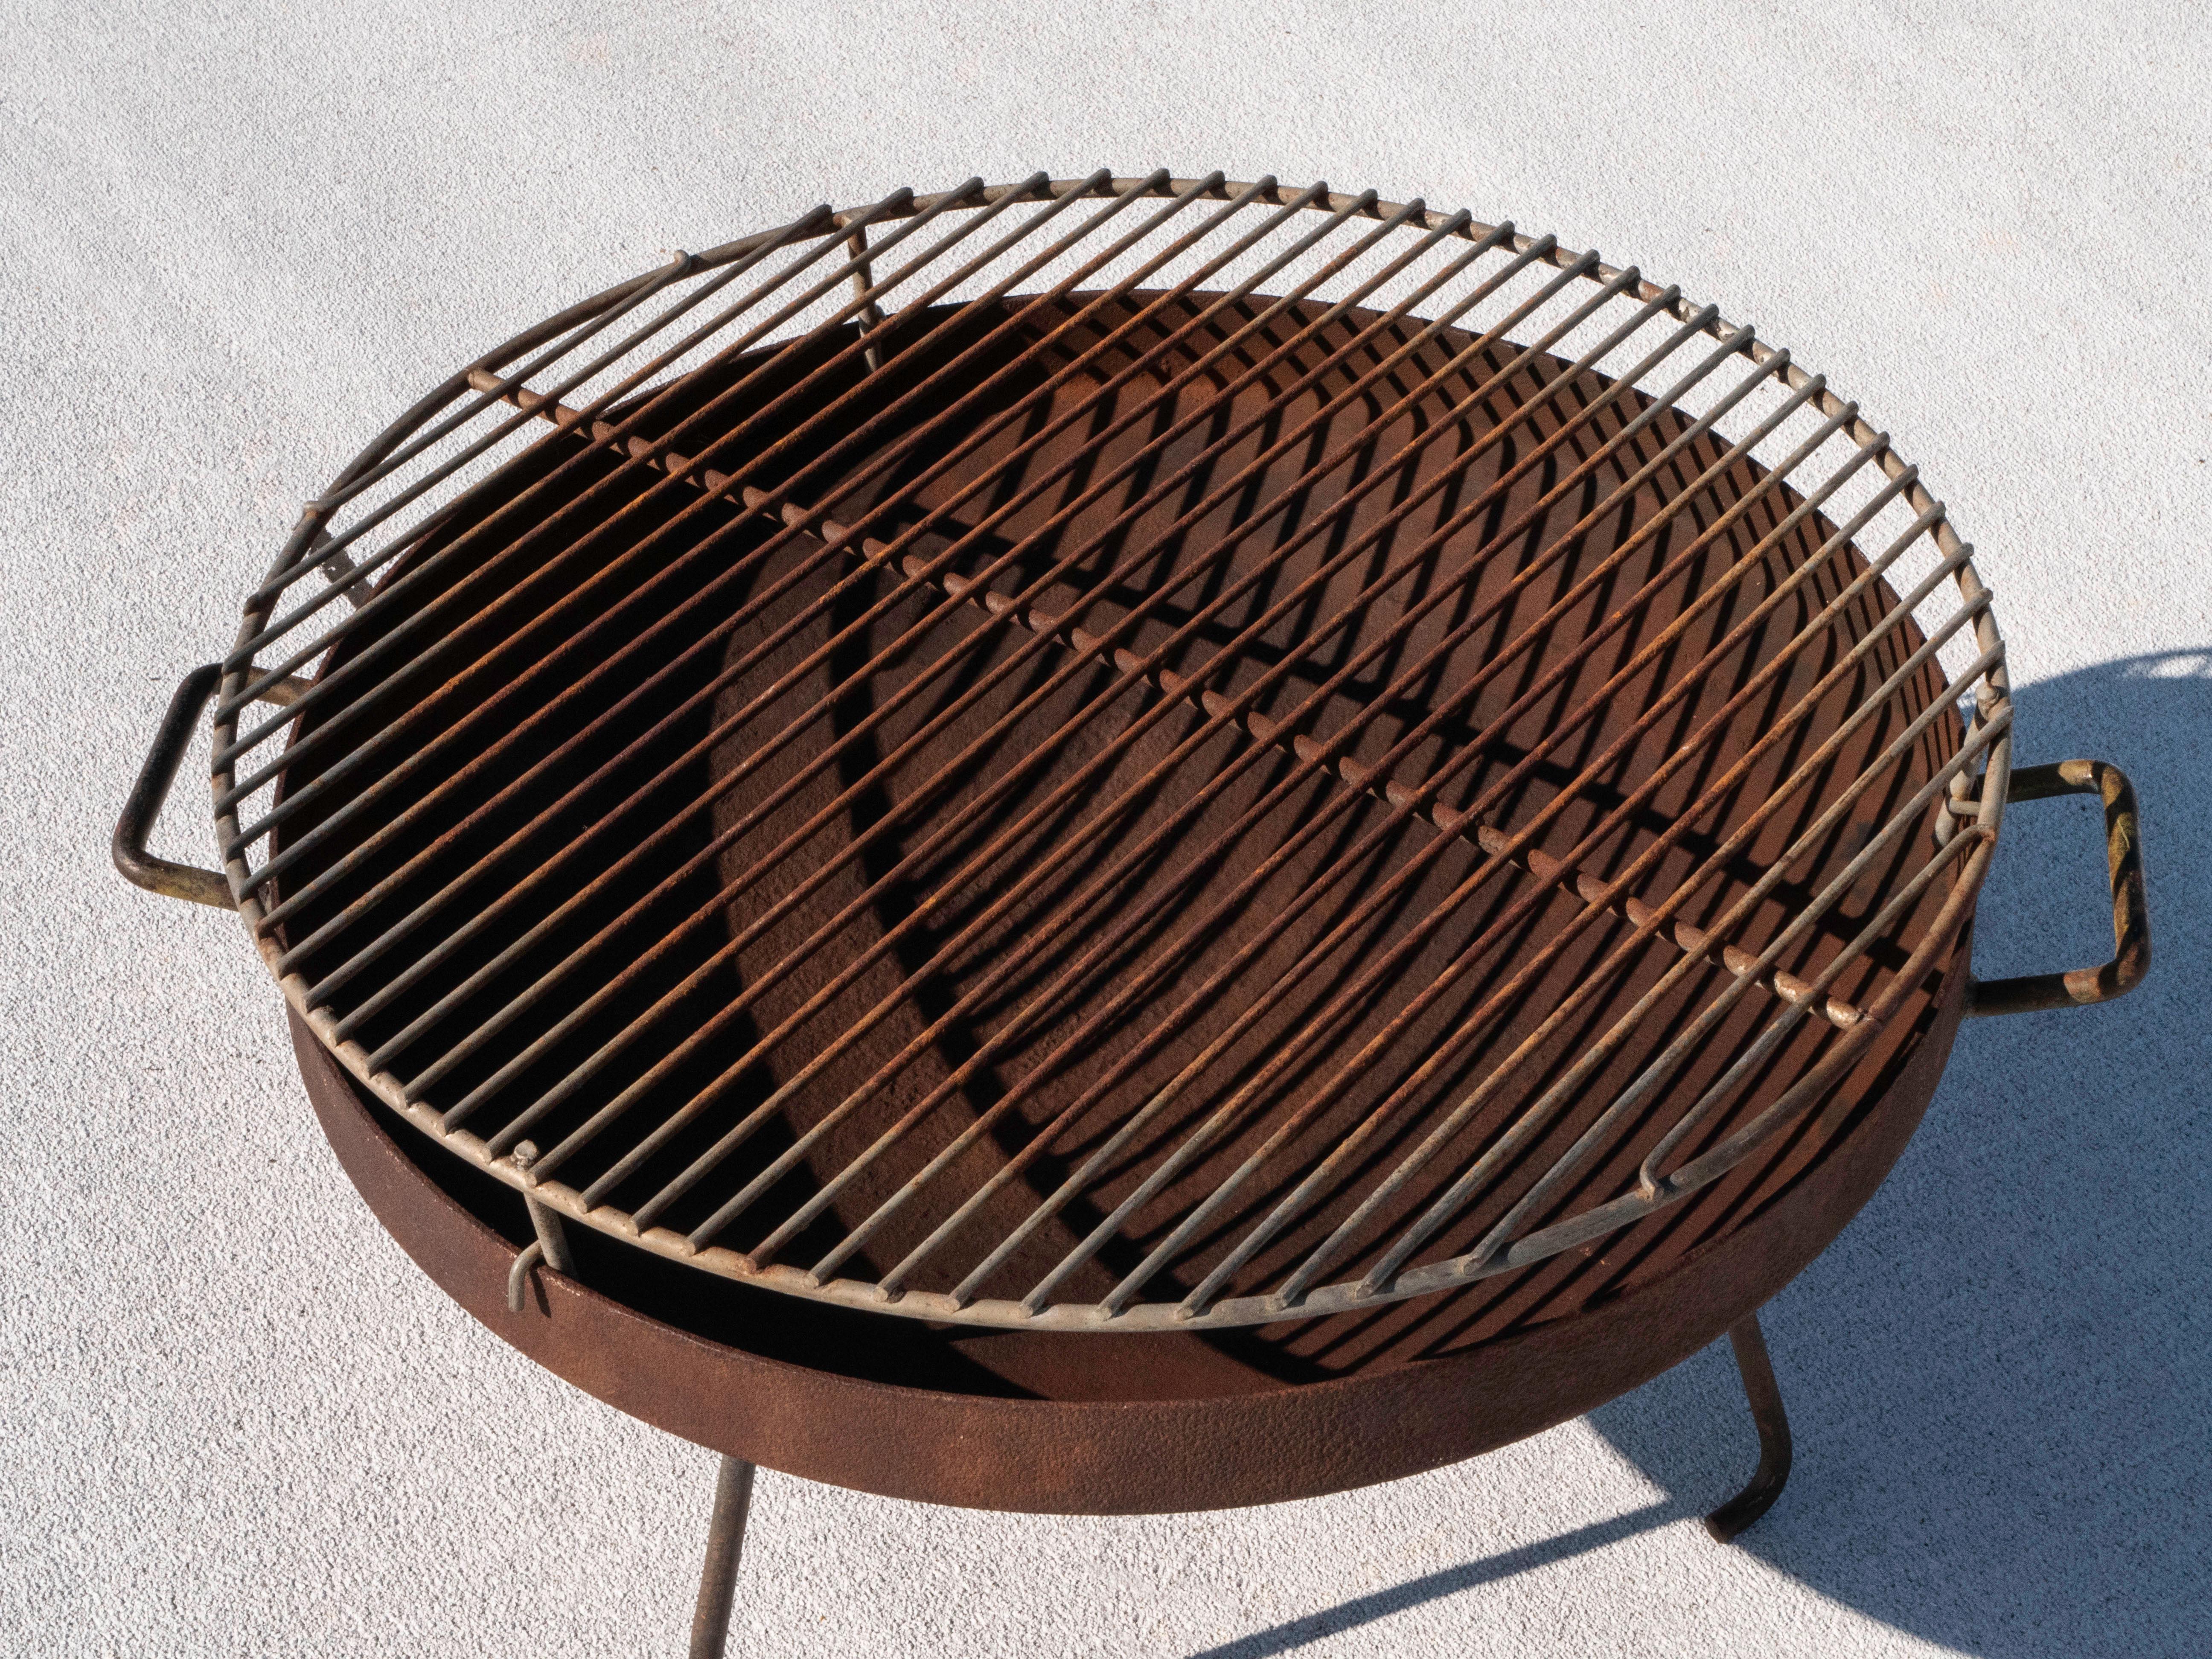 Solid iron fire pit brazier / barbeque grill by artist and designer Stan Hawk for company Hawk House.  

Made in California, circa 1950's.  The piece is in original condition and shows very well.  Has been lightly cleaned and is ready for use.  The